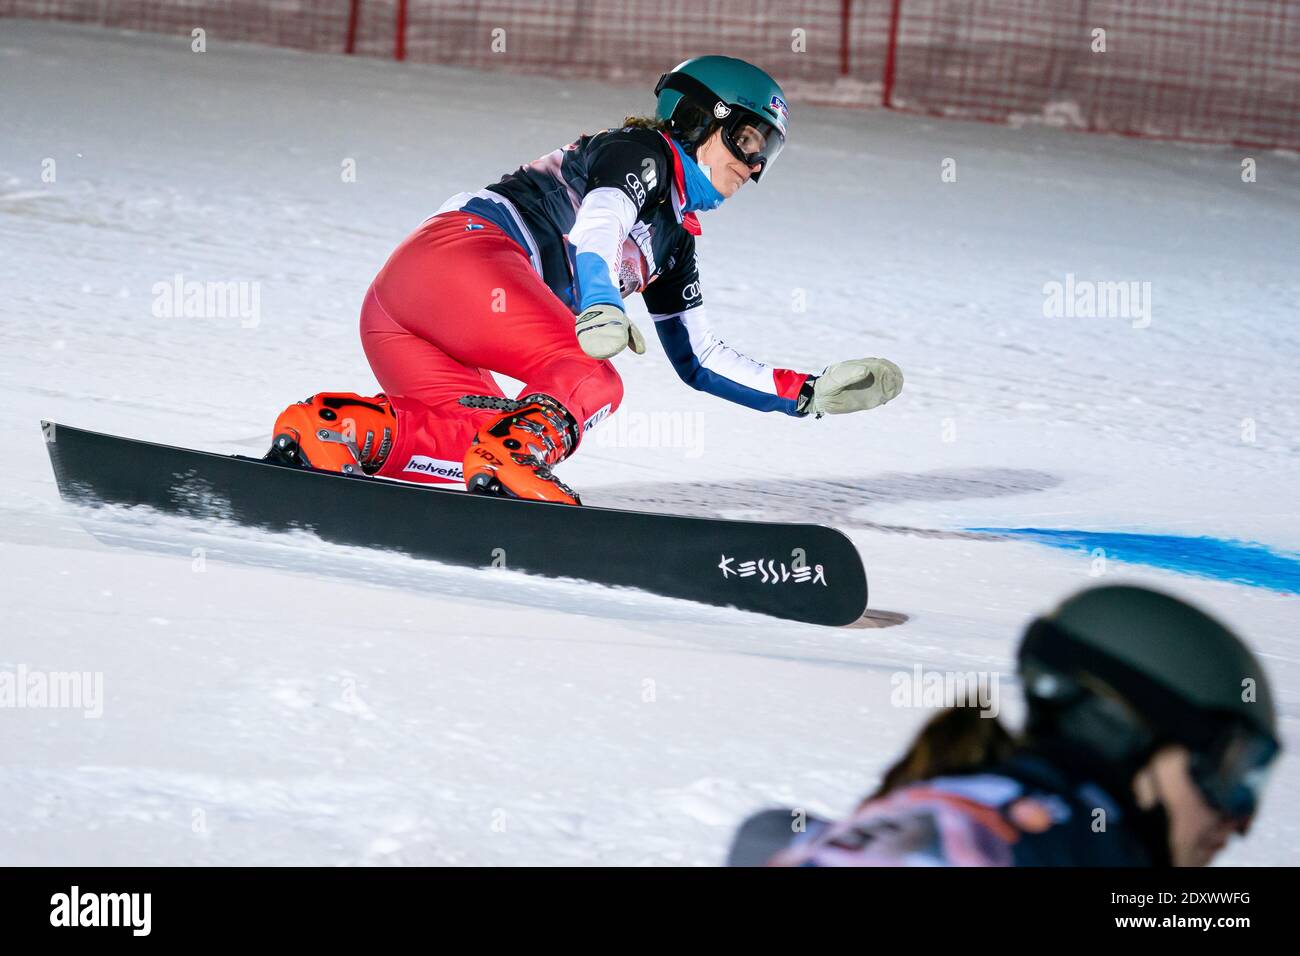 Cortina d'Ampezzo, Italy, 12 Dec 2020. KUMMER Patrizia of Switzerland competing in the Fis Snowboard World Cup 2021  Women's Parallel Giant Slalom on Stock Photo